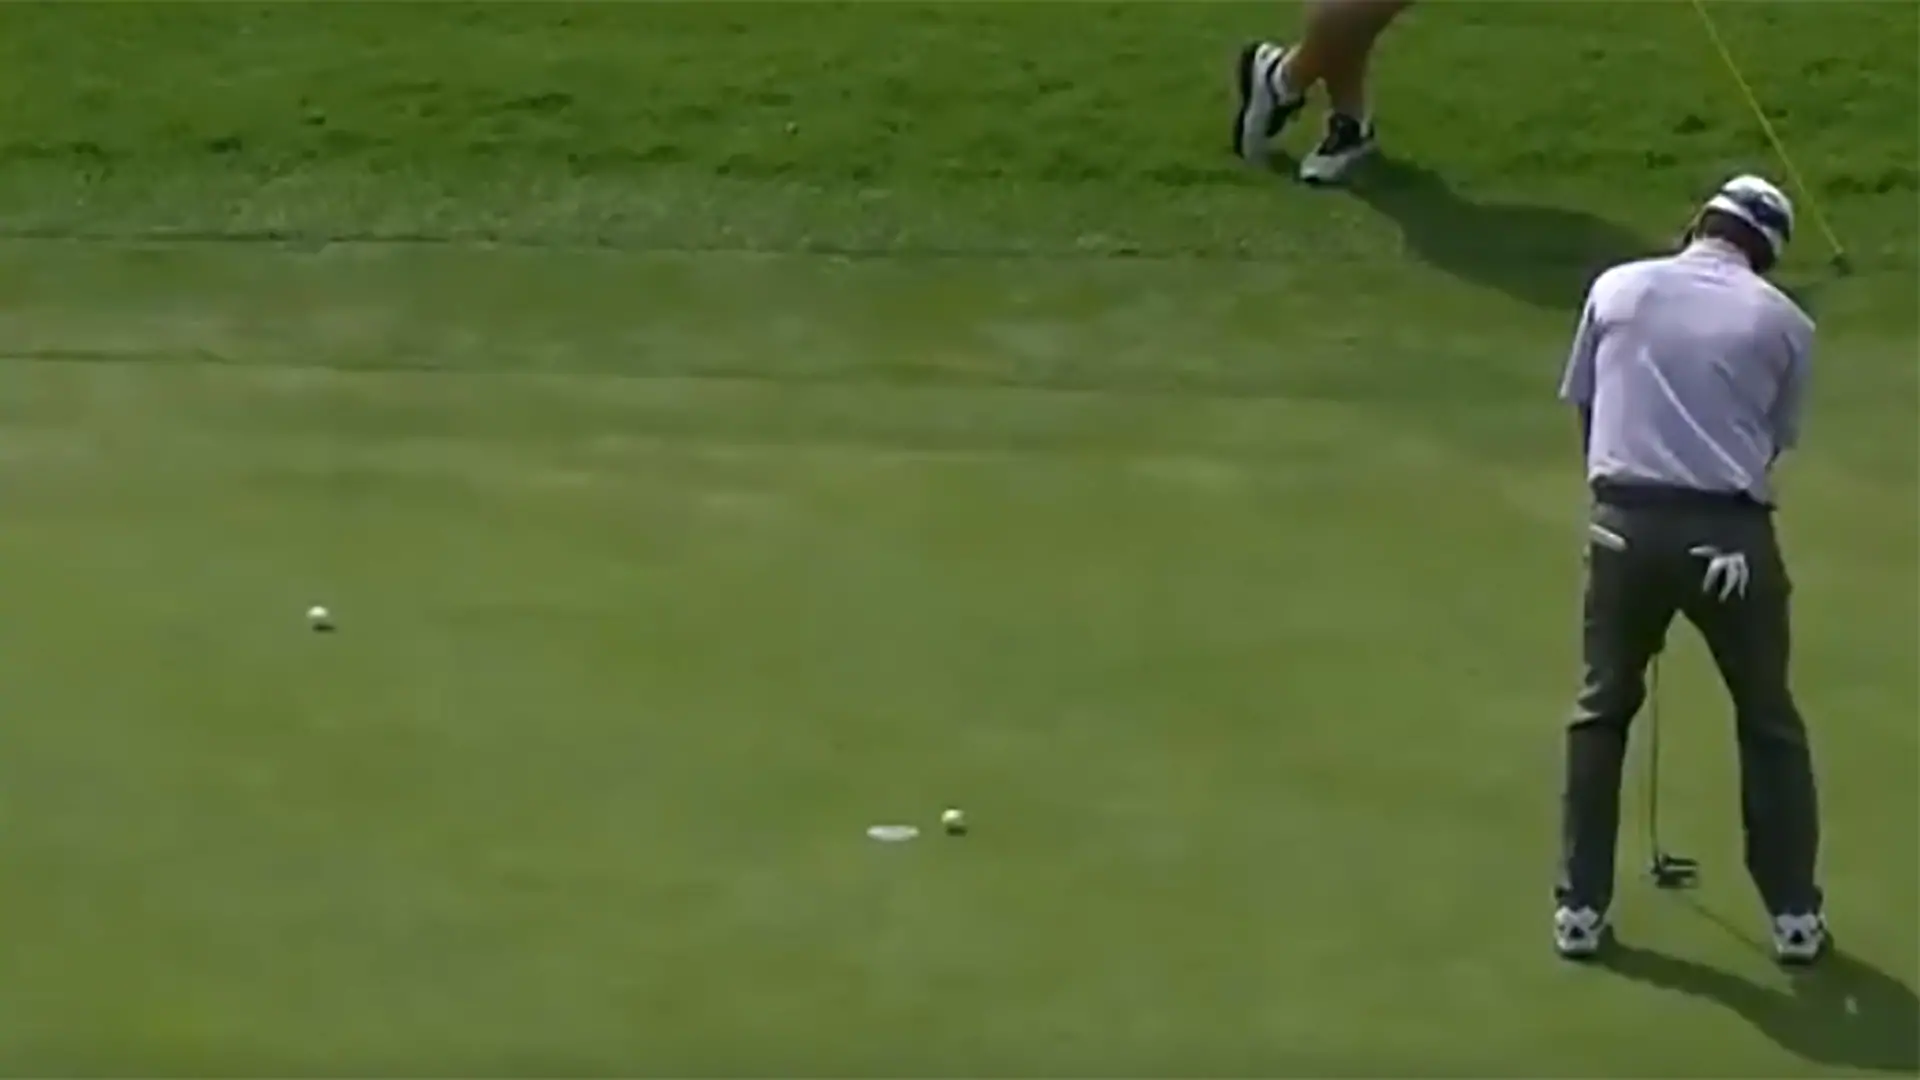 Watch: Cantlay nearly aces par-4 12th while Kisner putts for par